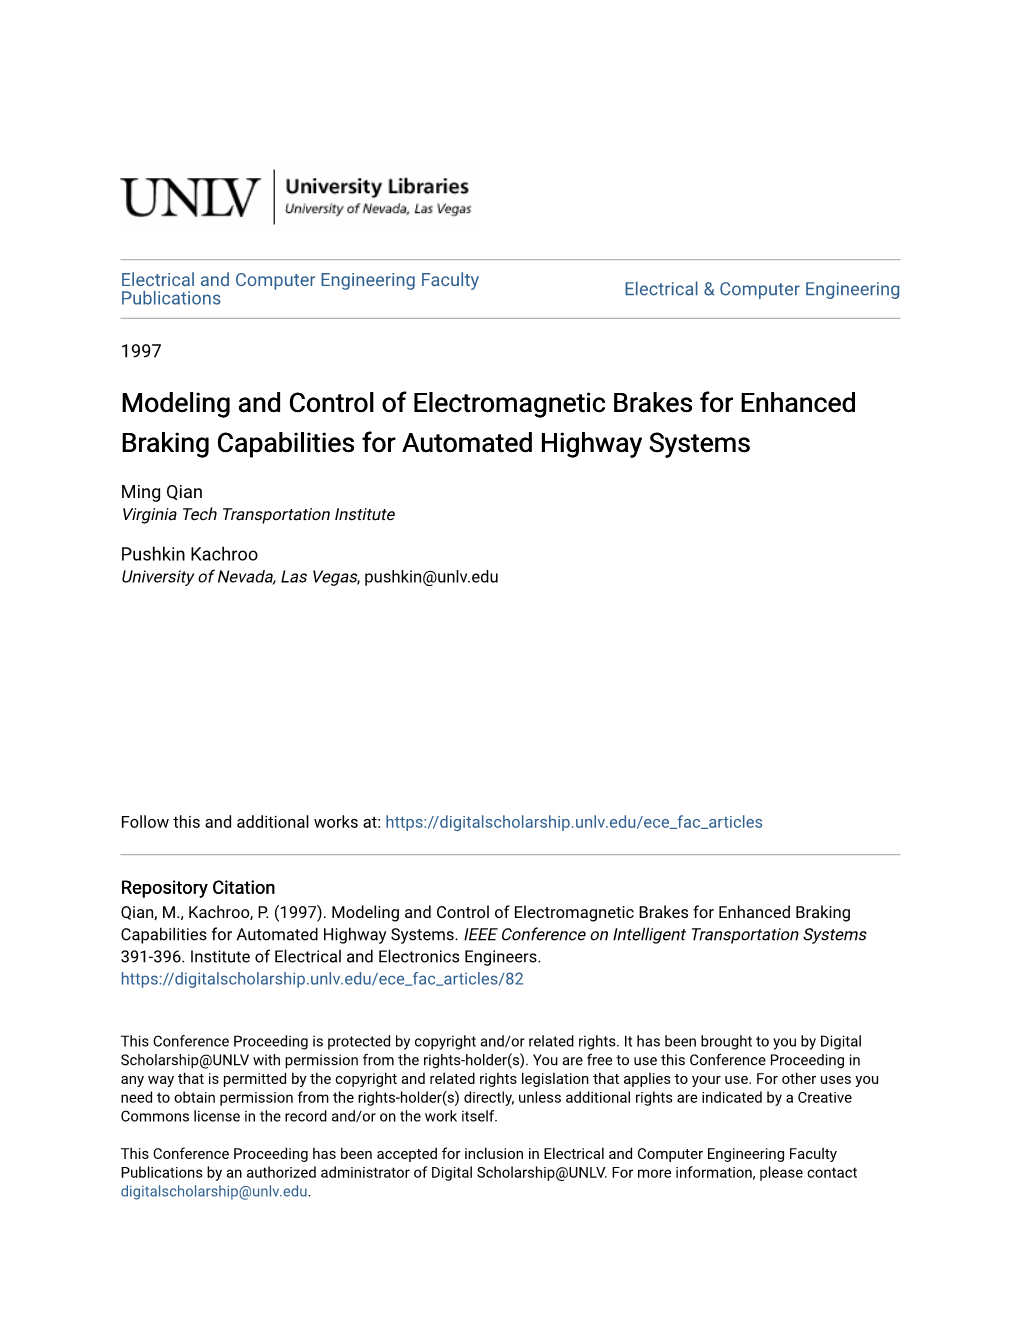 Modeling and Control of Electromagnetic Brakes for Enhanced Braking Capabilities for Automated Highway Systems